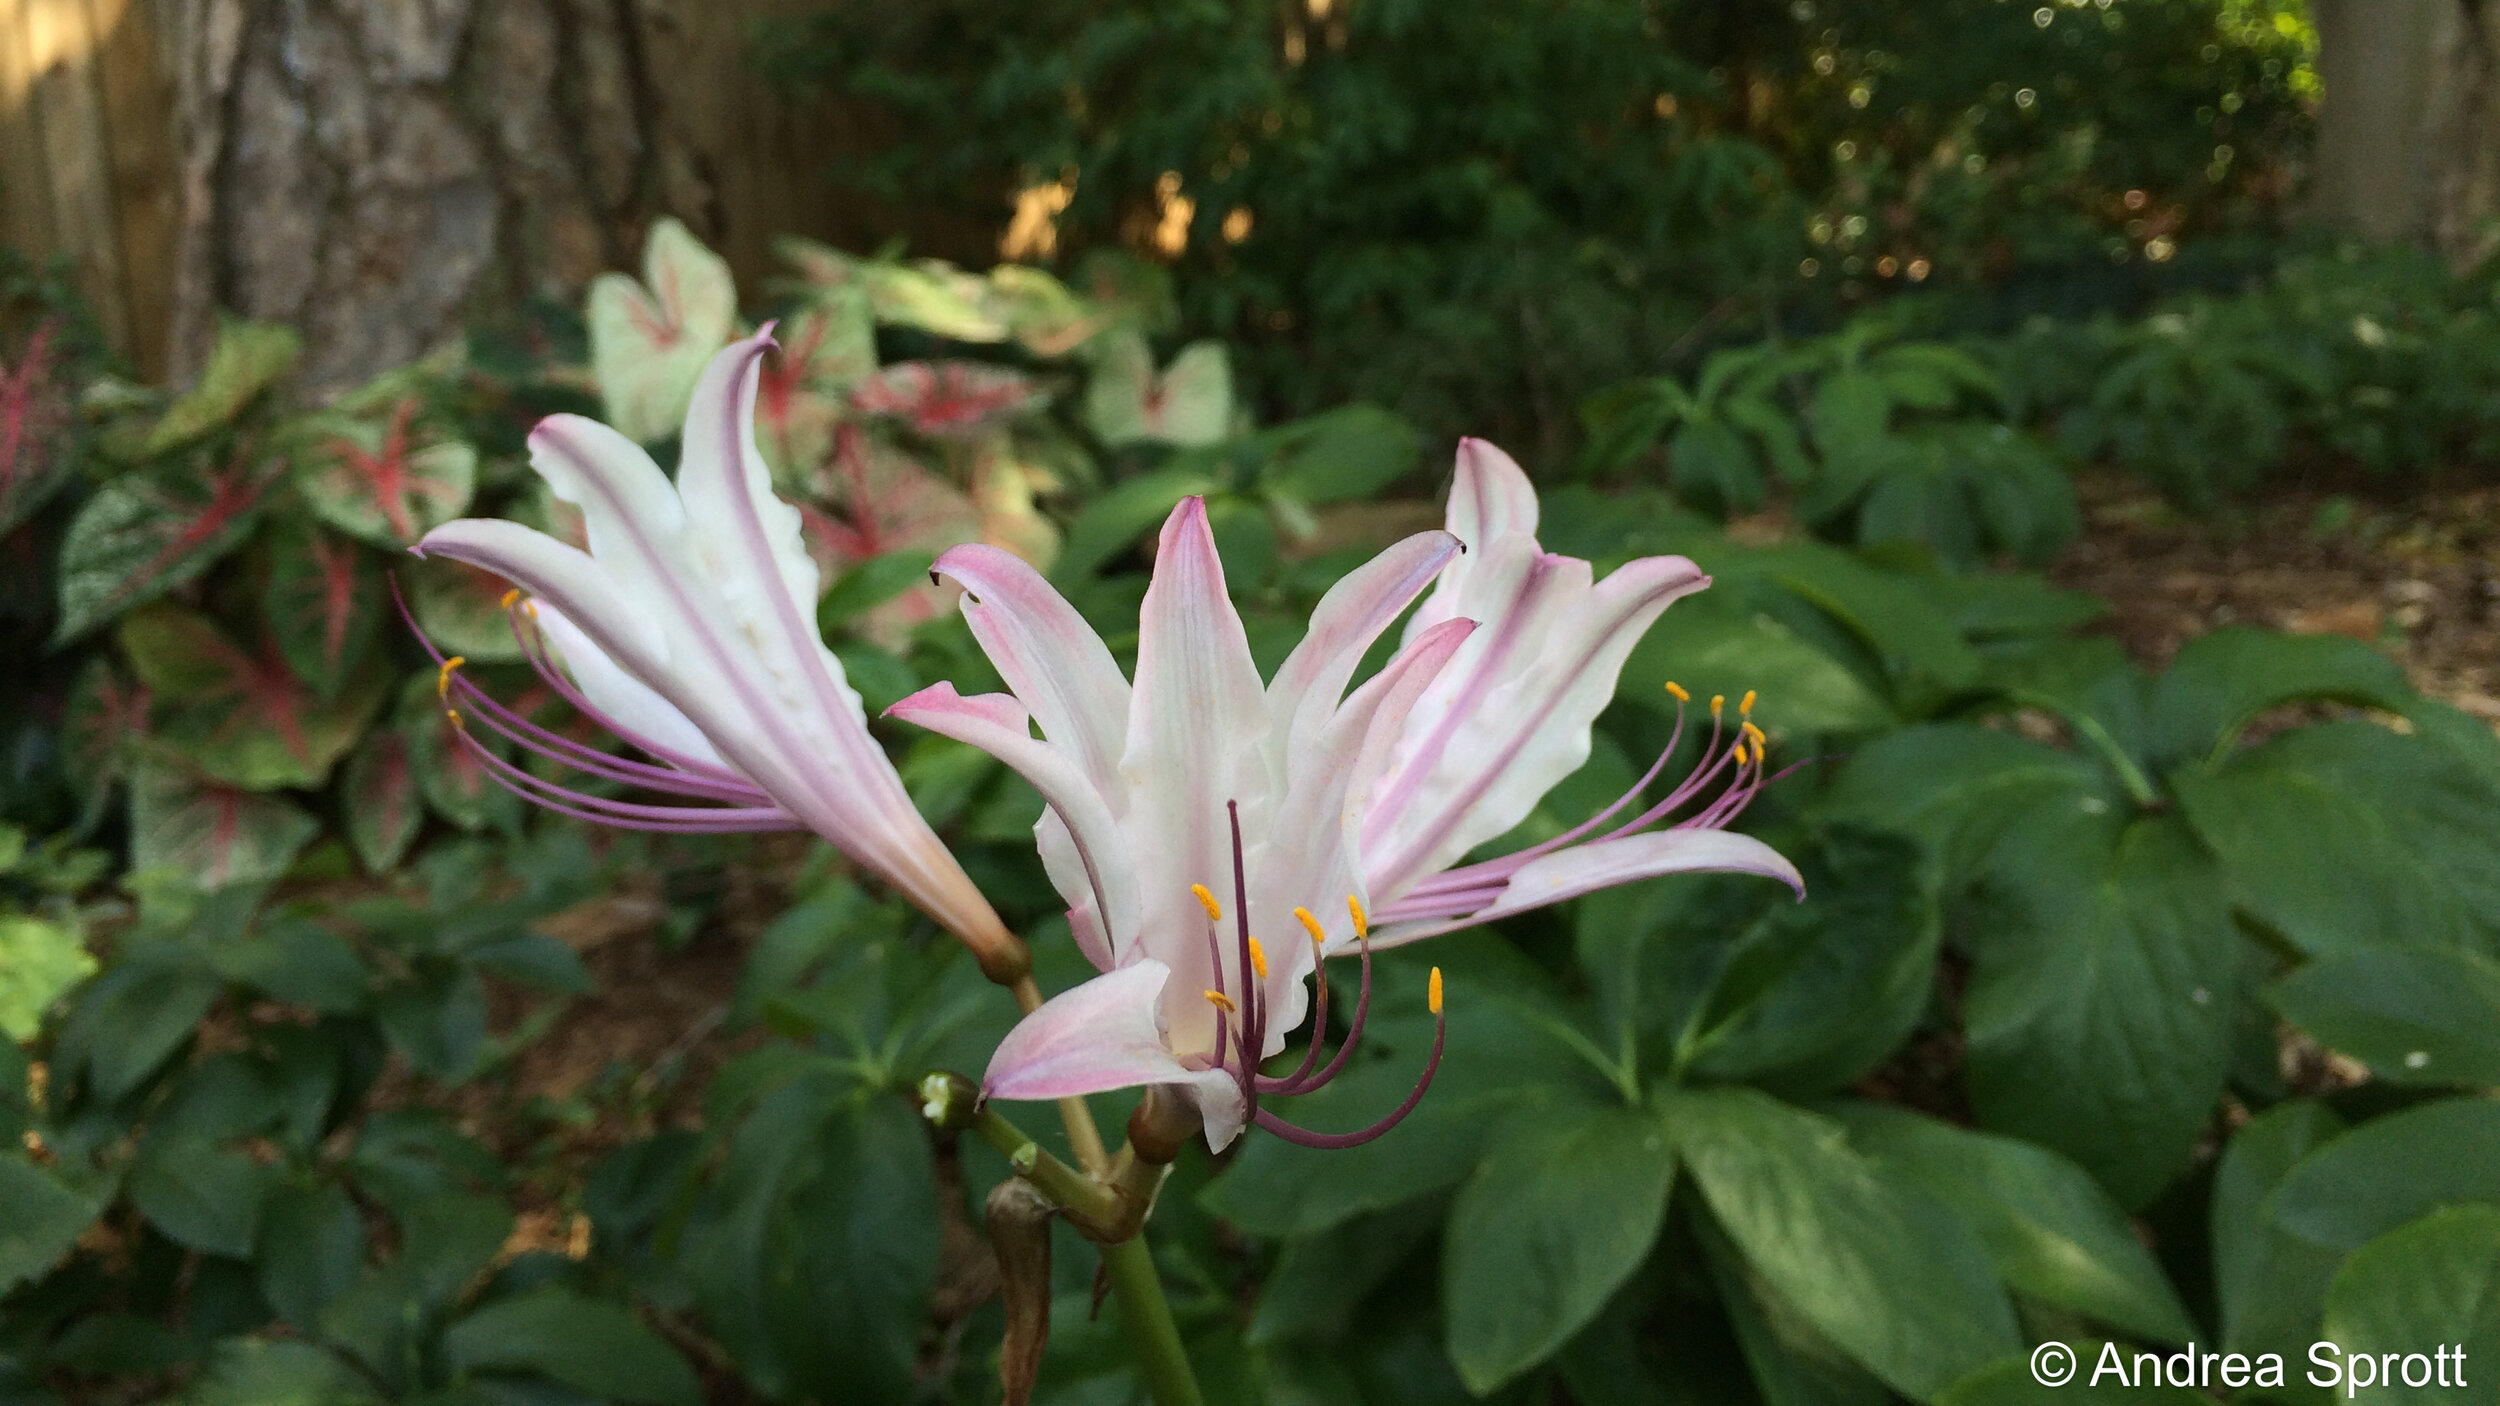  Surprise!  This  Lycoris incarnata , planted by Elizabeth in 1952, reappeared after decades of dormancy. 